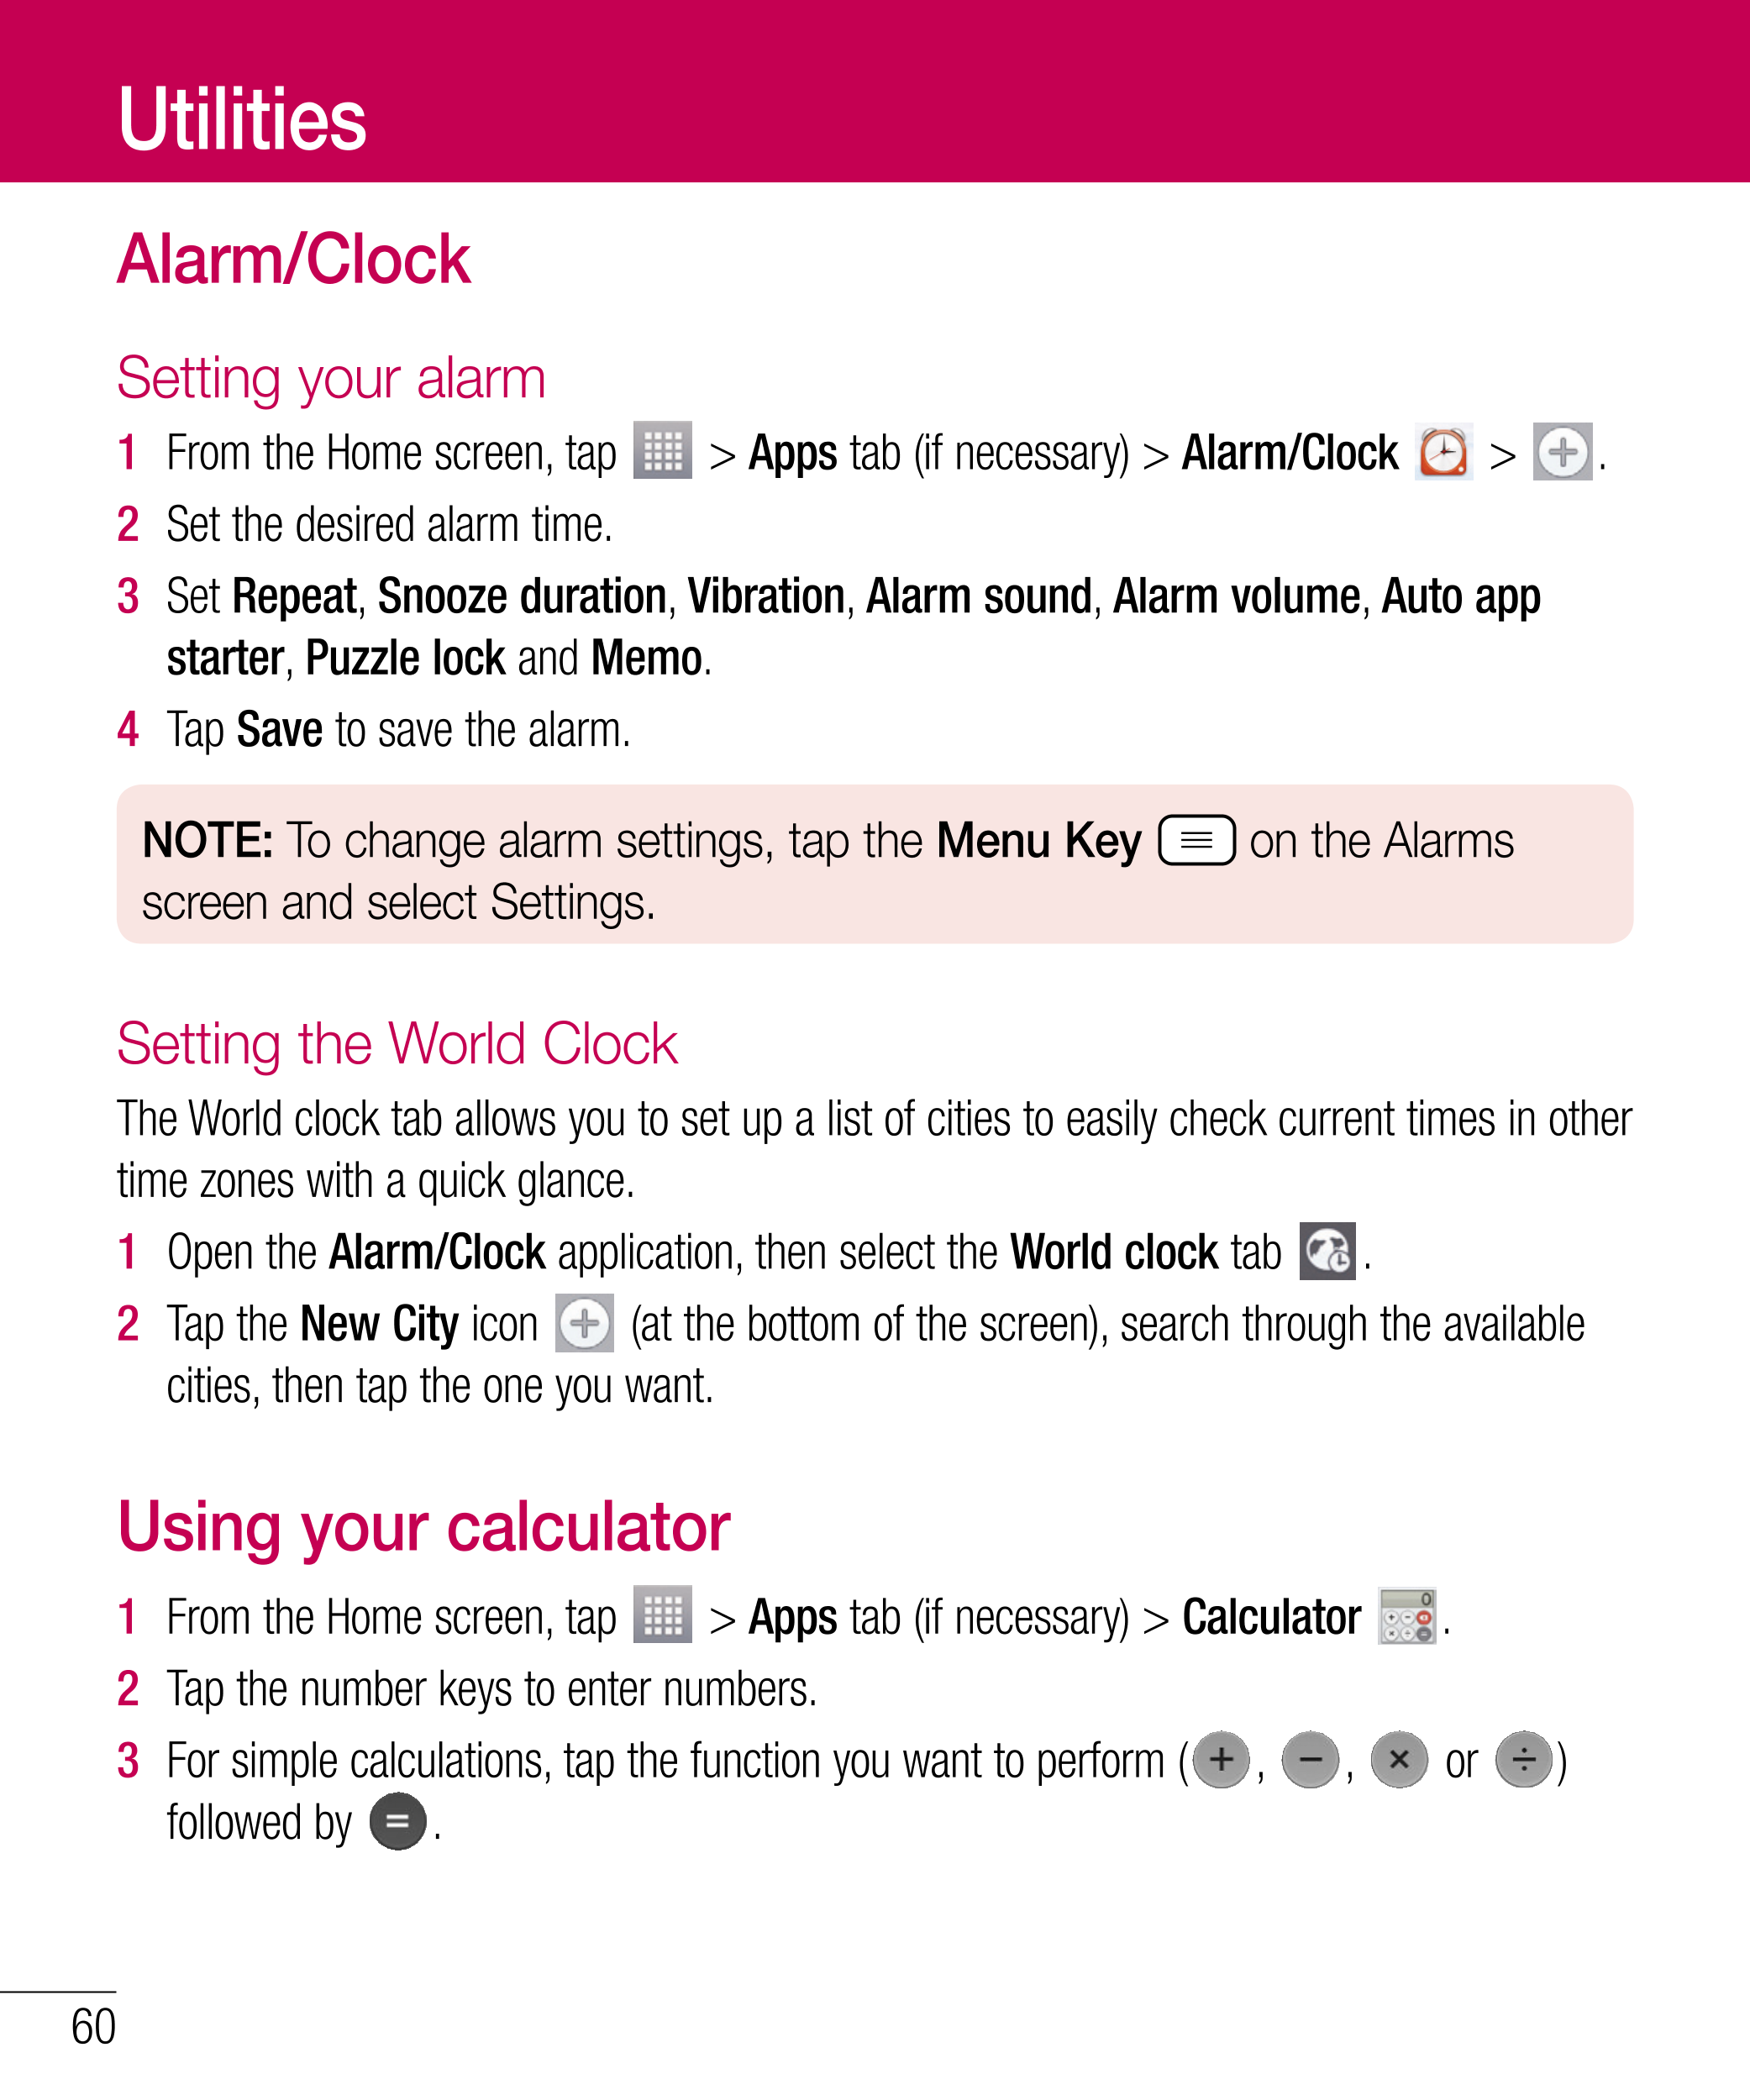 Utilities
Alarm/Clock
Setting your alarm
1  From the Home screen, tap   > Apps tab (if necessary) > Alarm/Clock   >  .
2  Set th